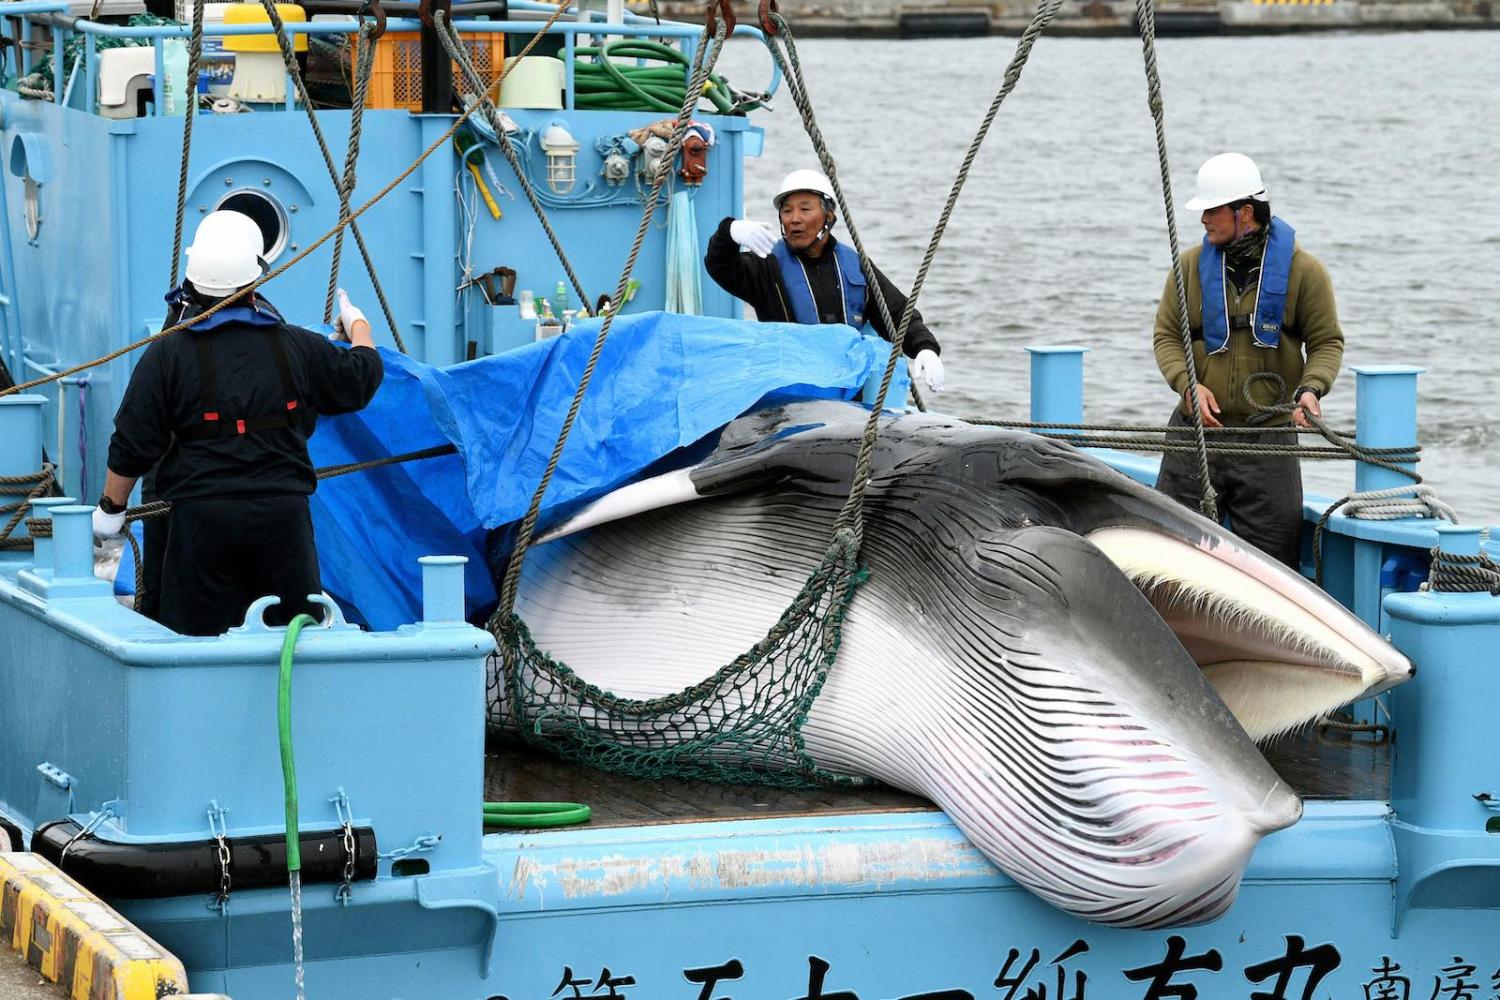 A minke whale is unloaded at Kushiro Port on the first day of the commercial whale hunt, 1 July 2019, in Kushiro, Hokkaido, Japan (Photo: The Asahi Shimbun via Getty)